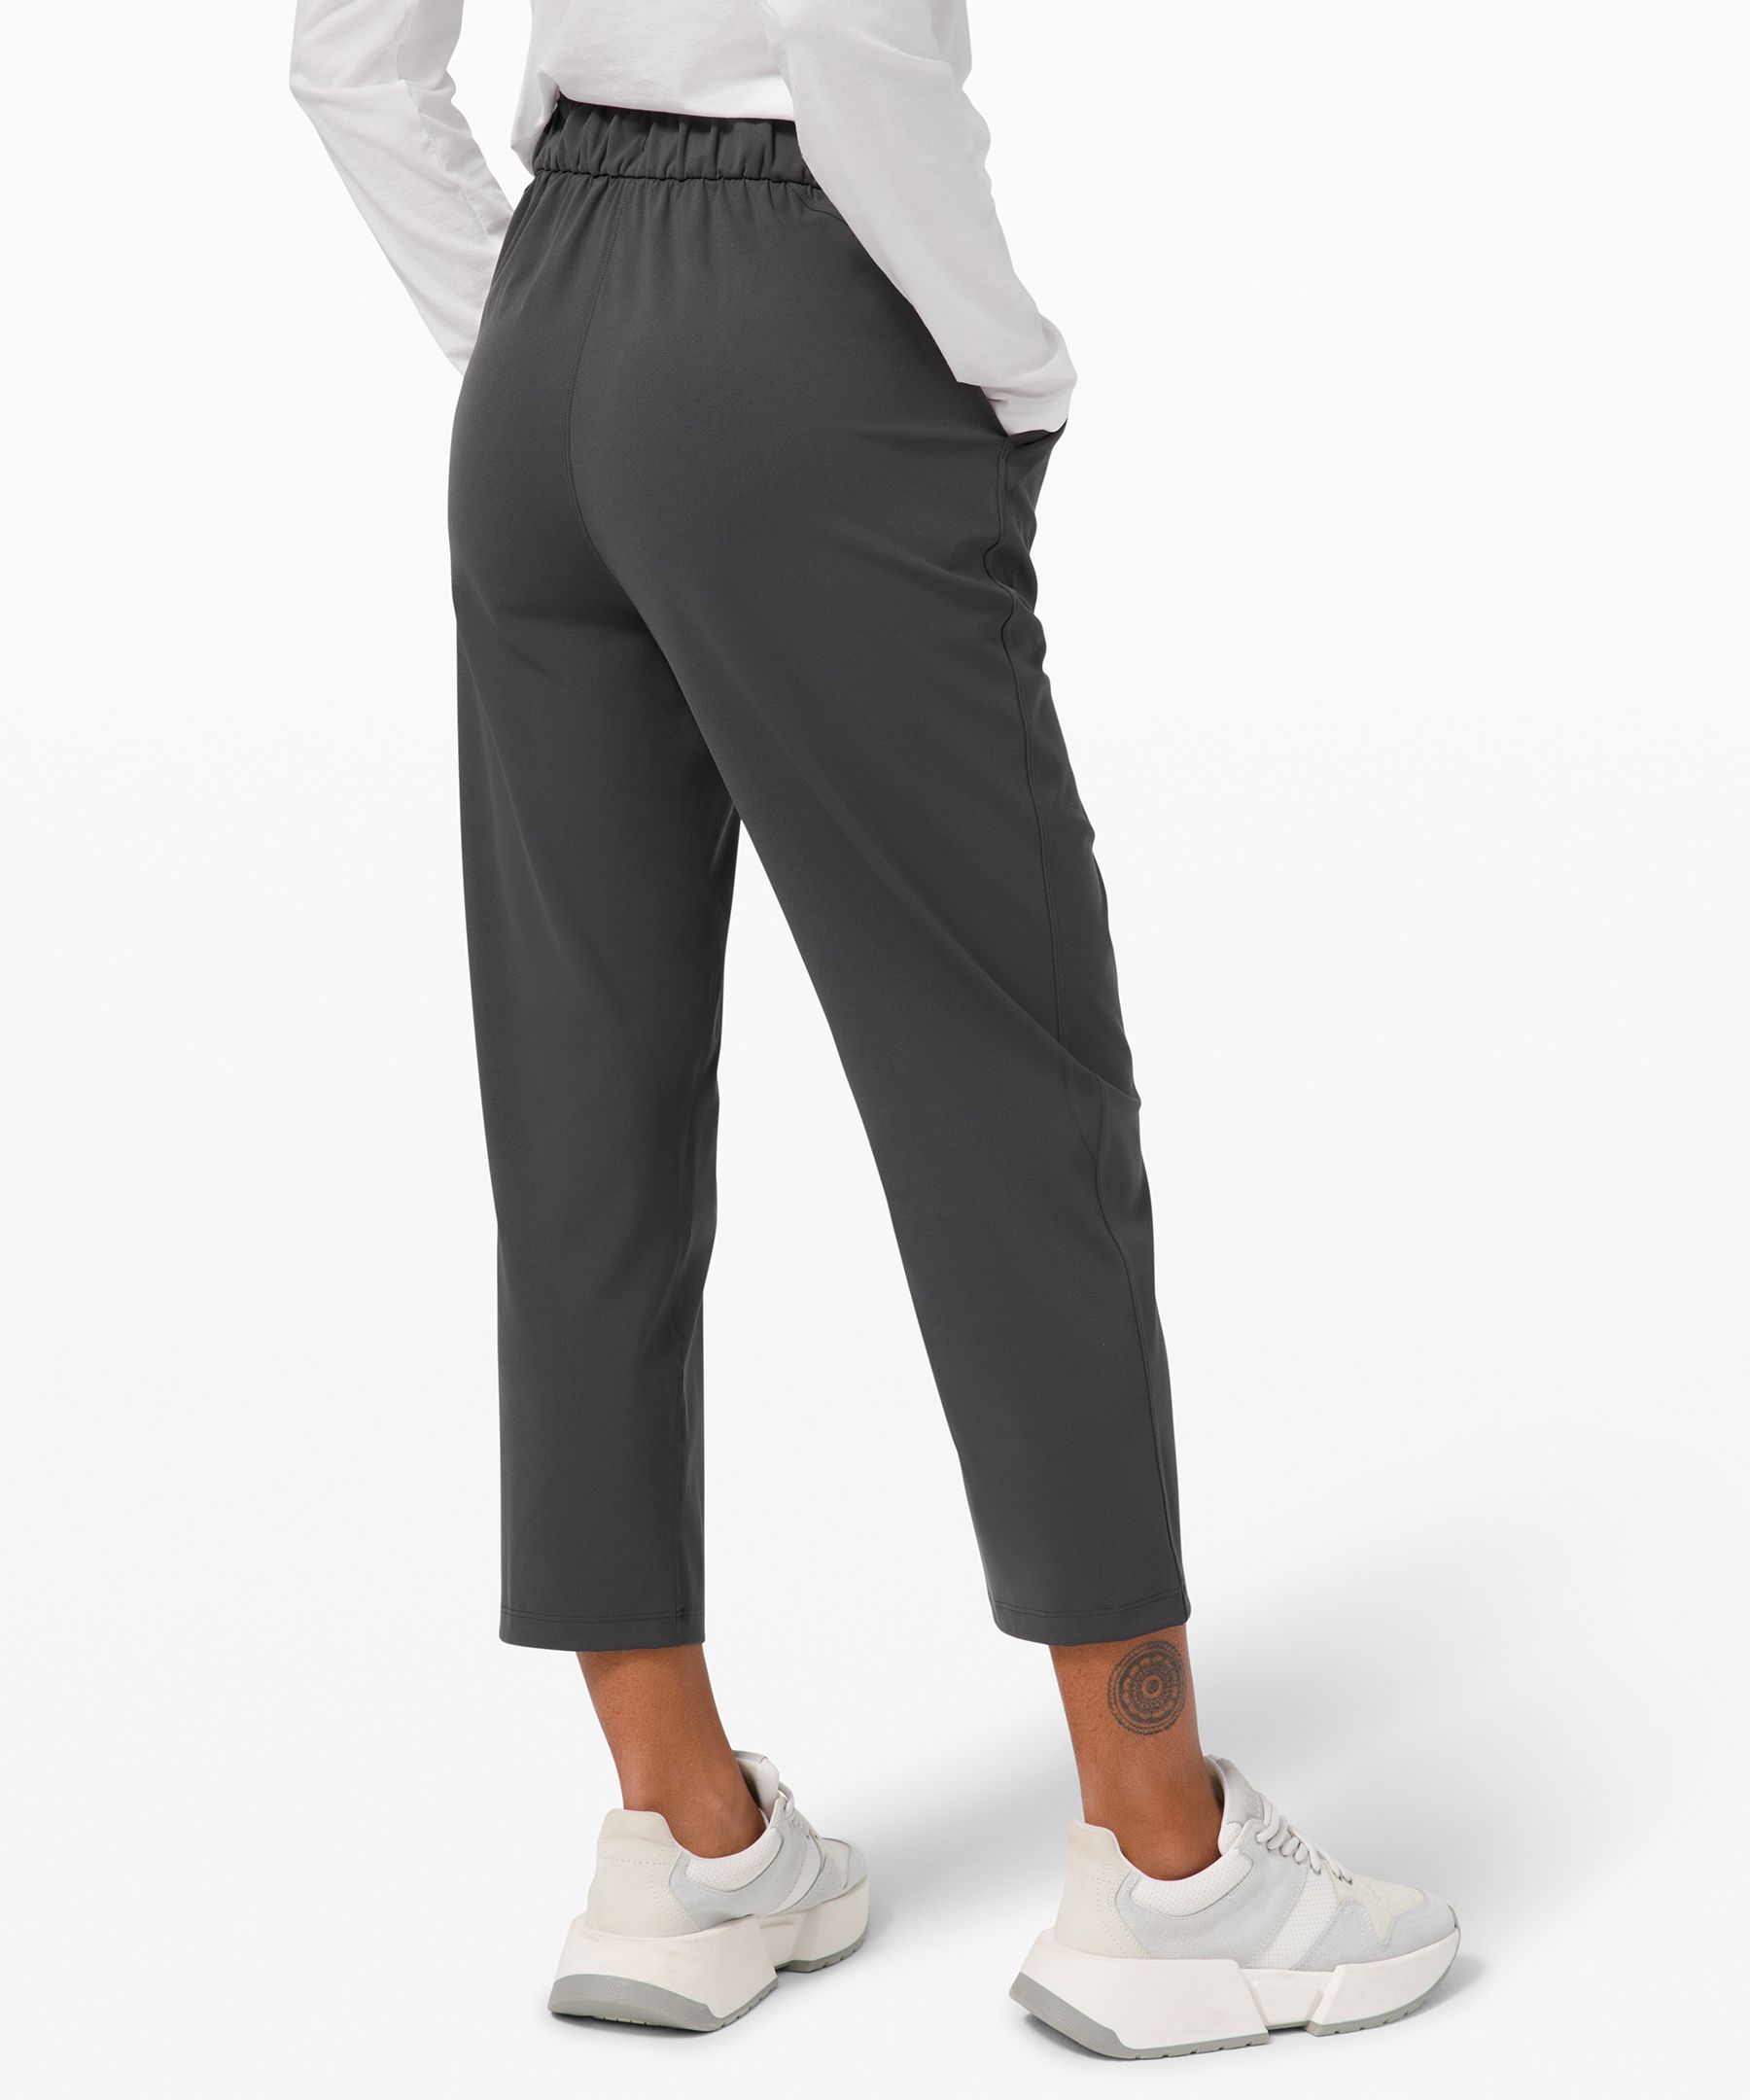 lululemon athletica Stretch High-rise Crop 23 in Natural